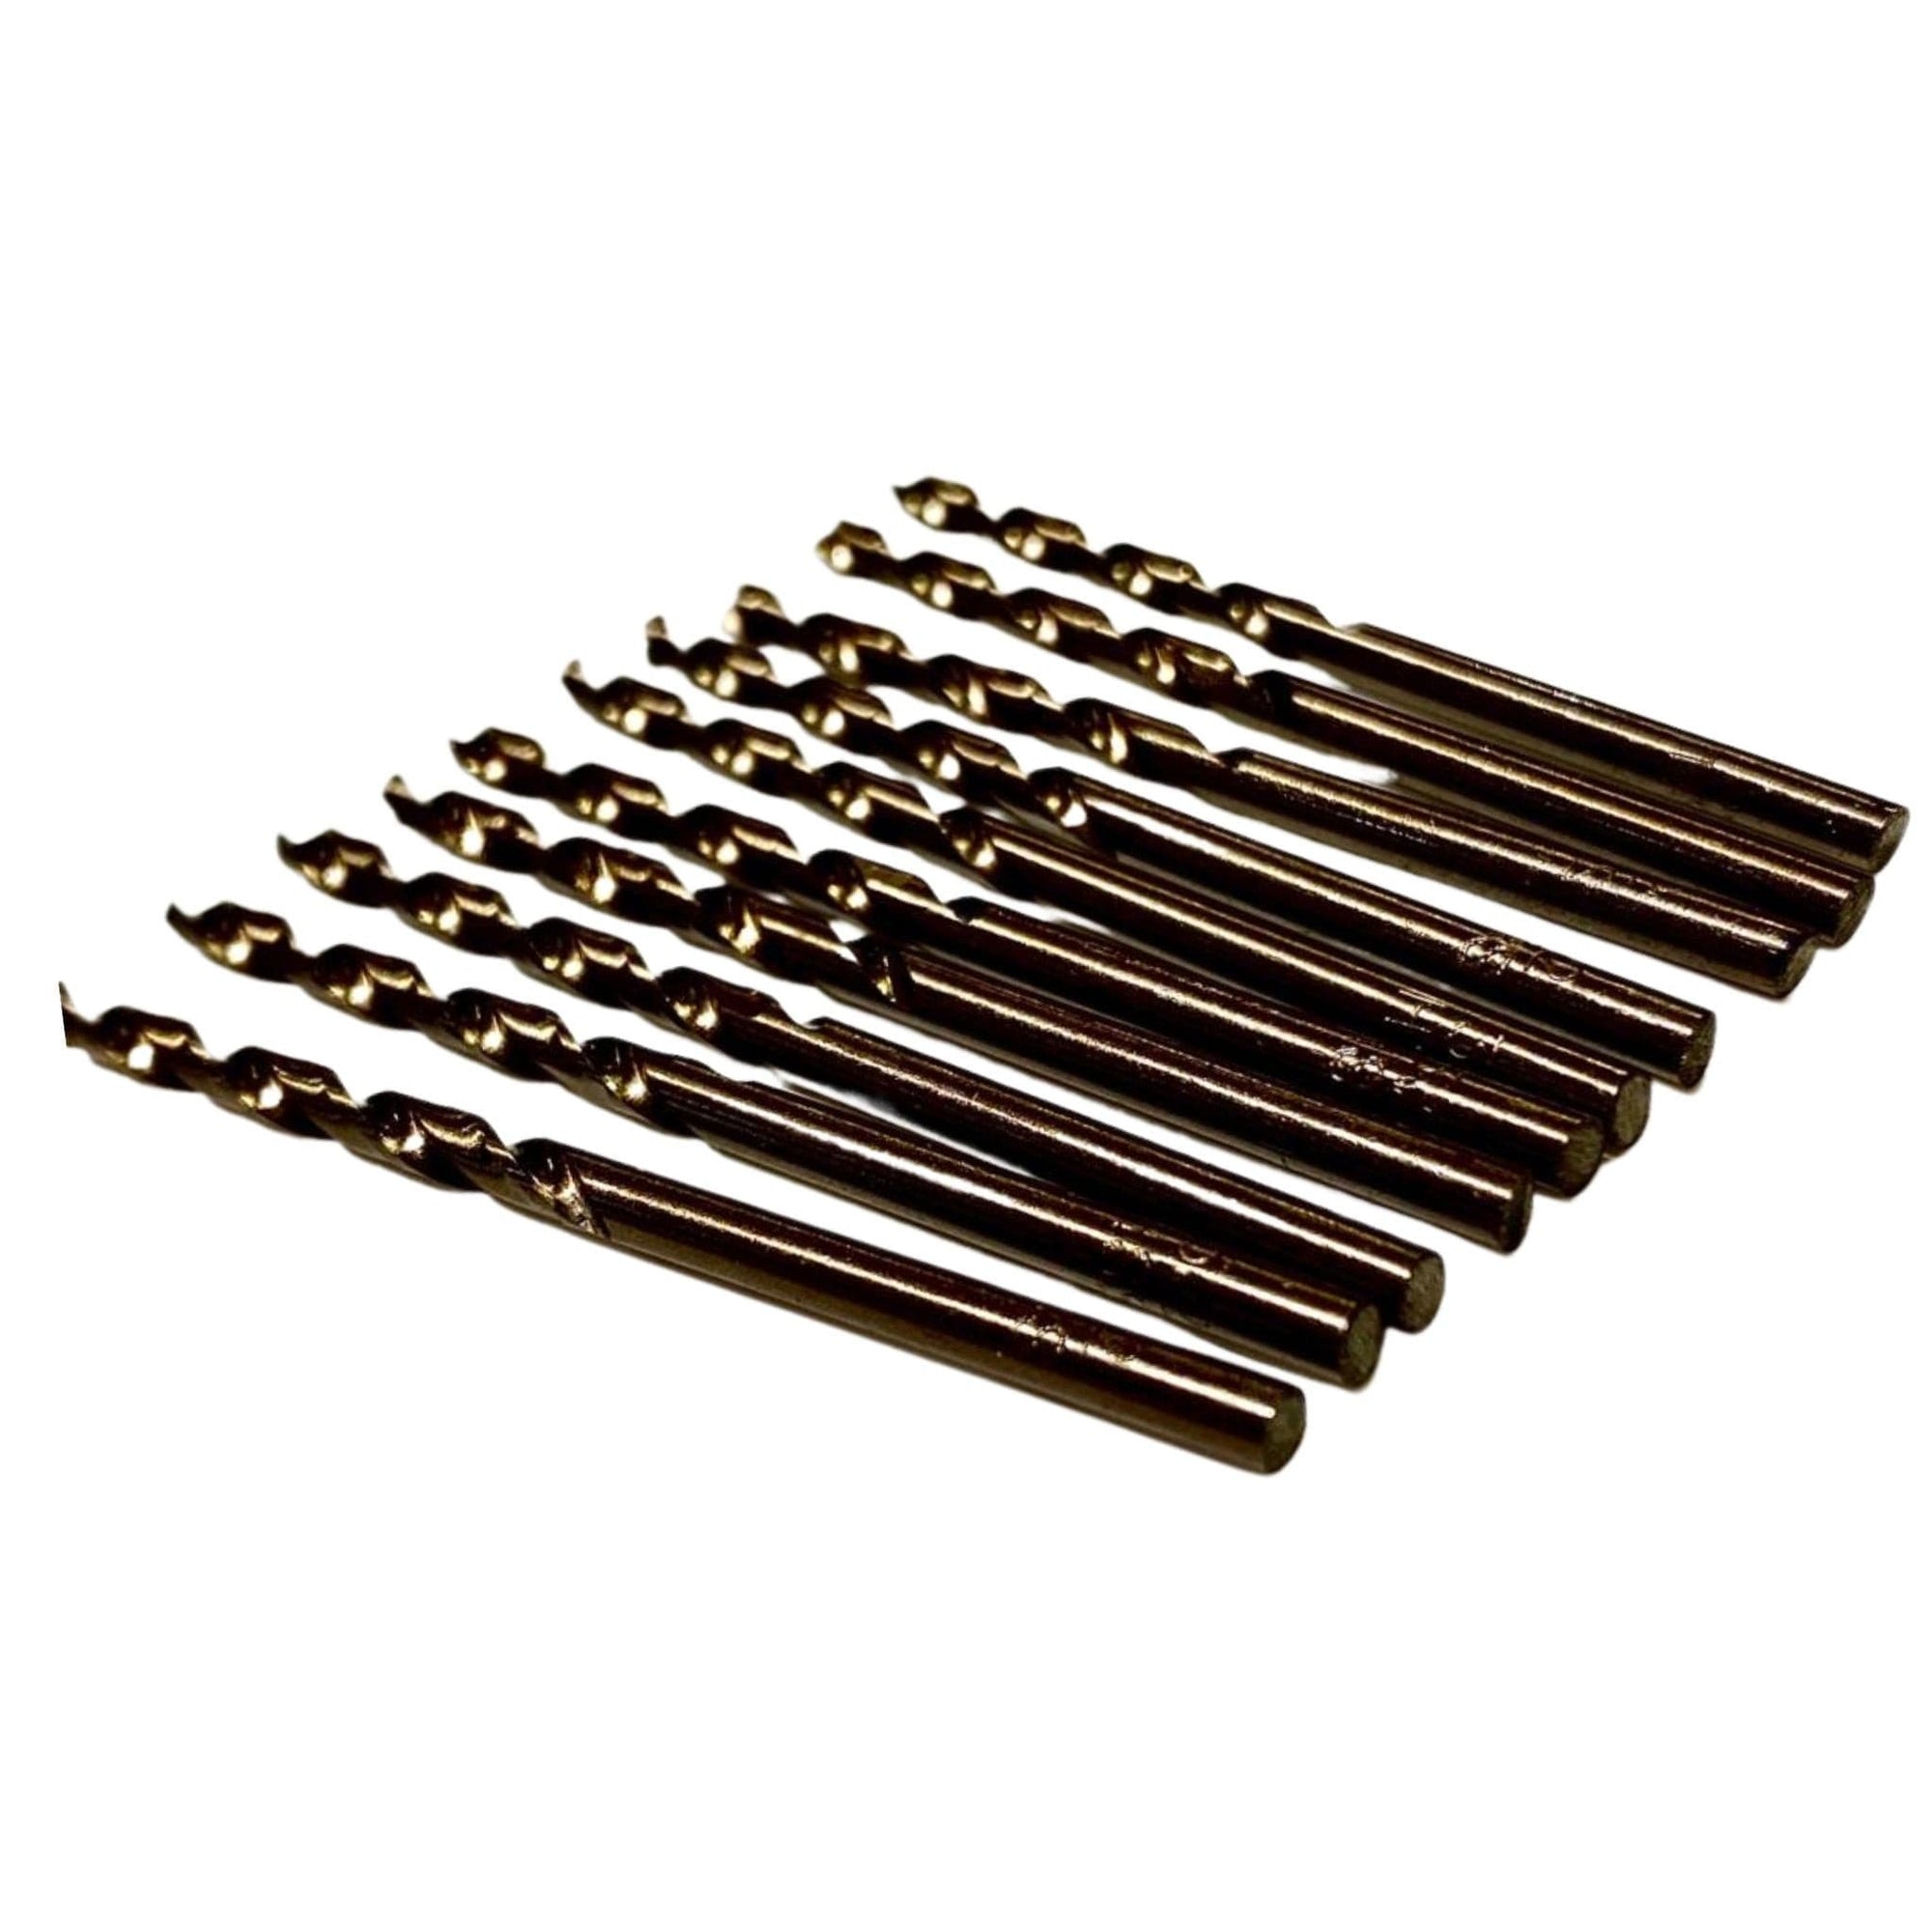 10 Piece - HSS Drill Bits - 4.0mm - South East Clearance Centre